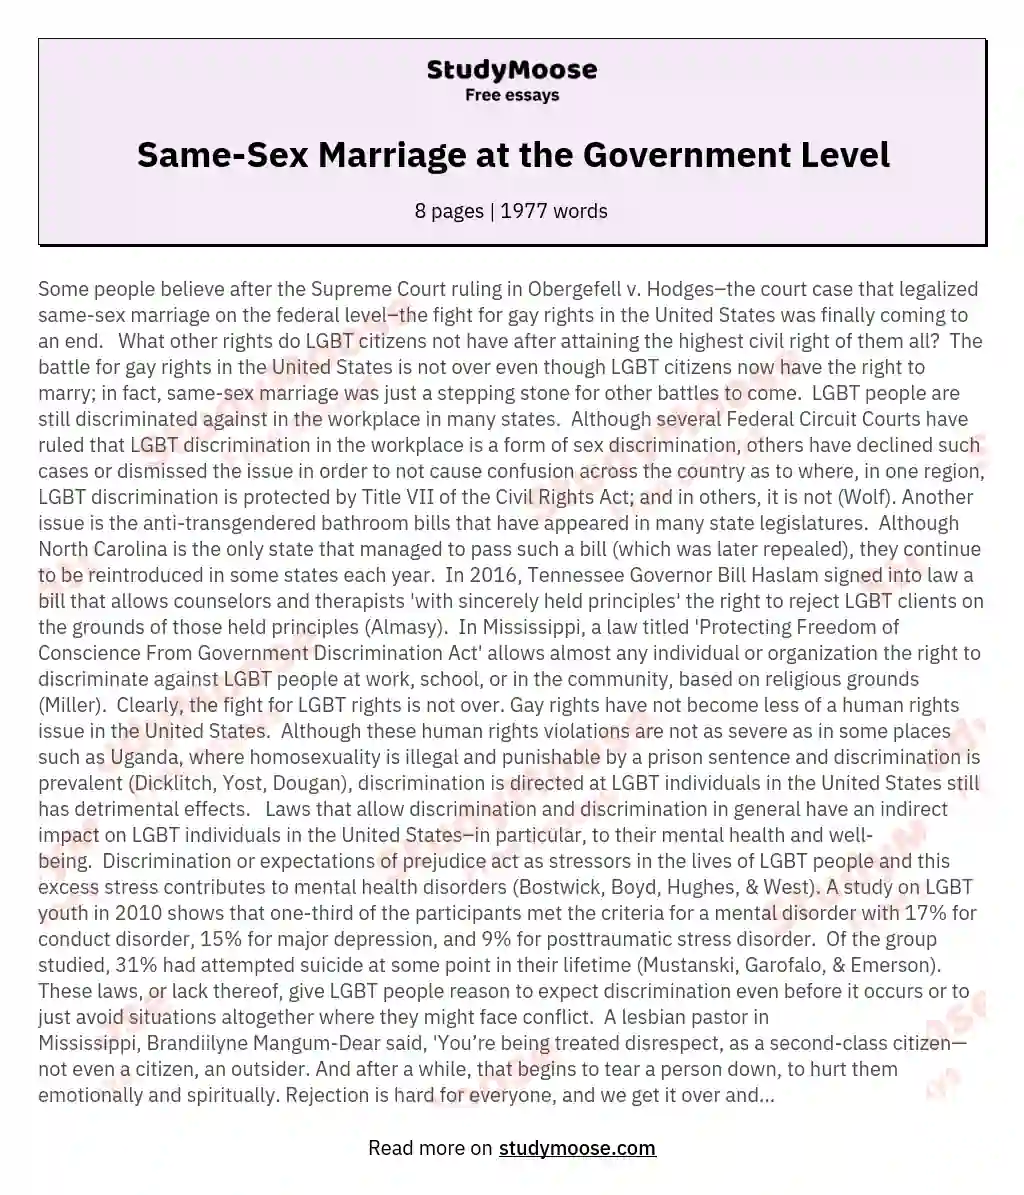 Same-Sex Marriage at the Government Level essay